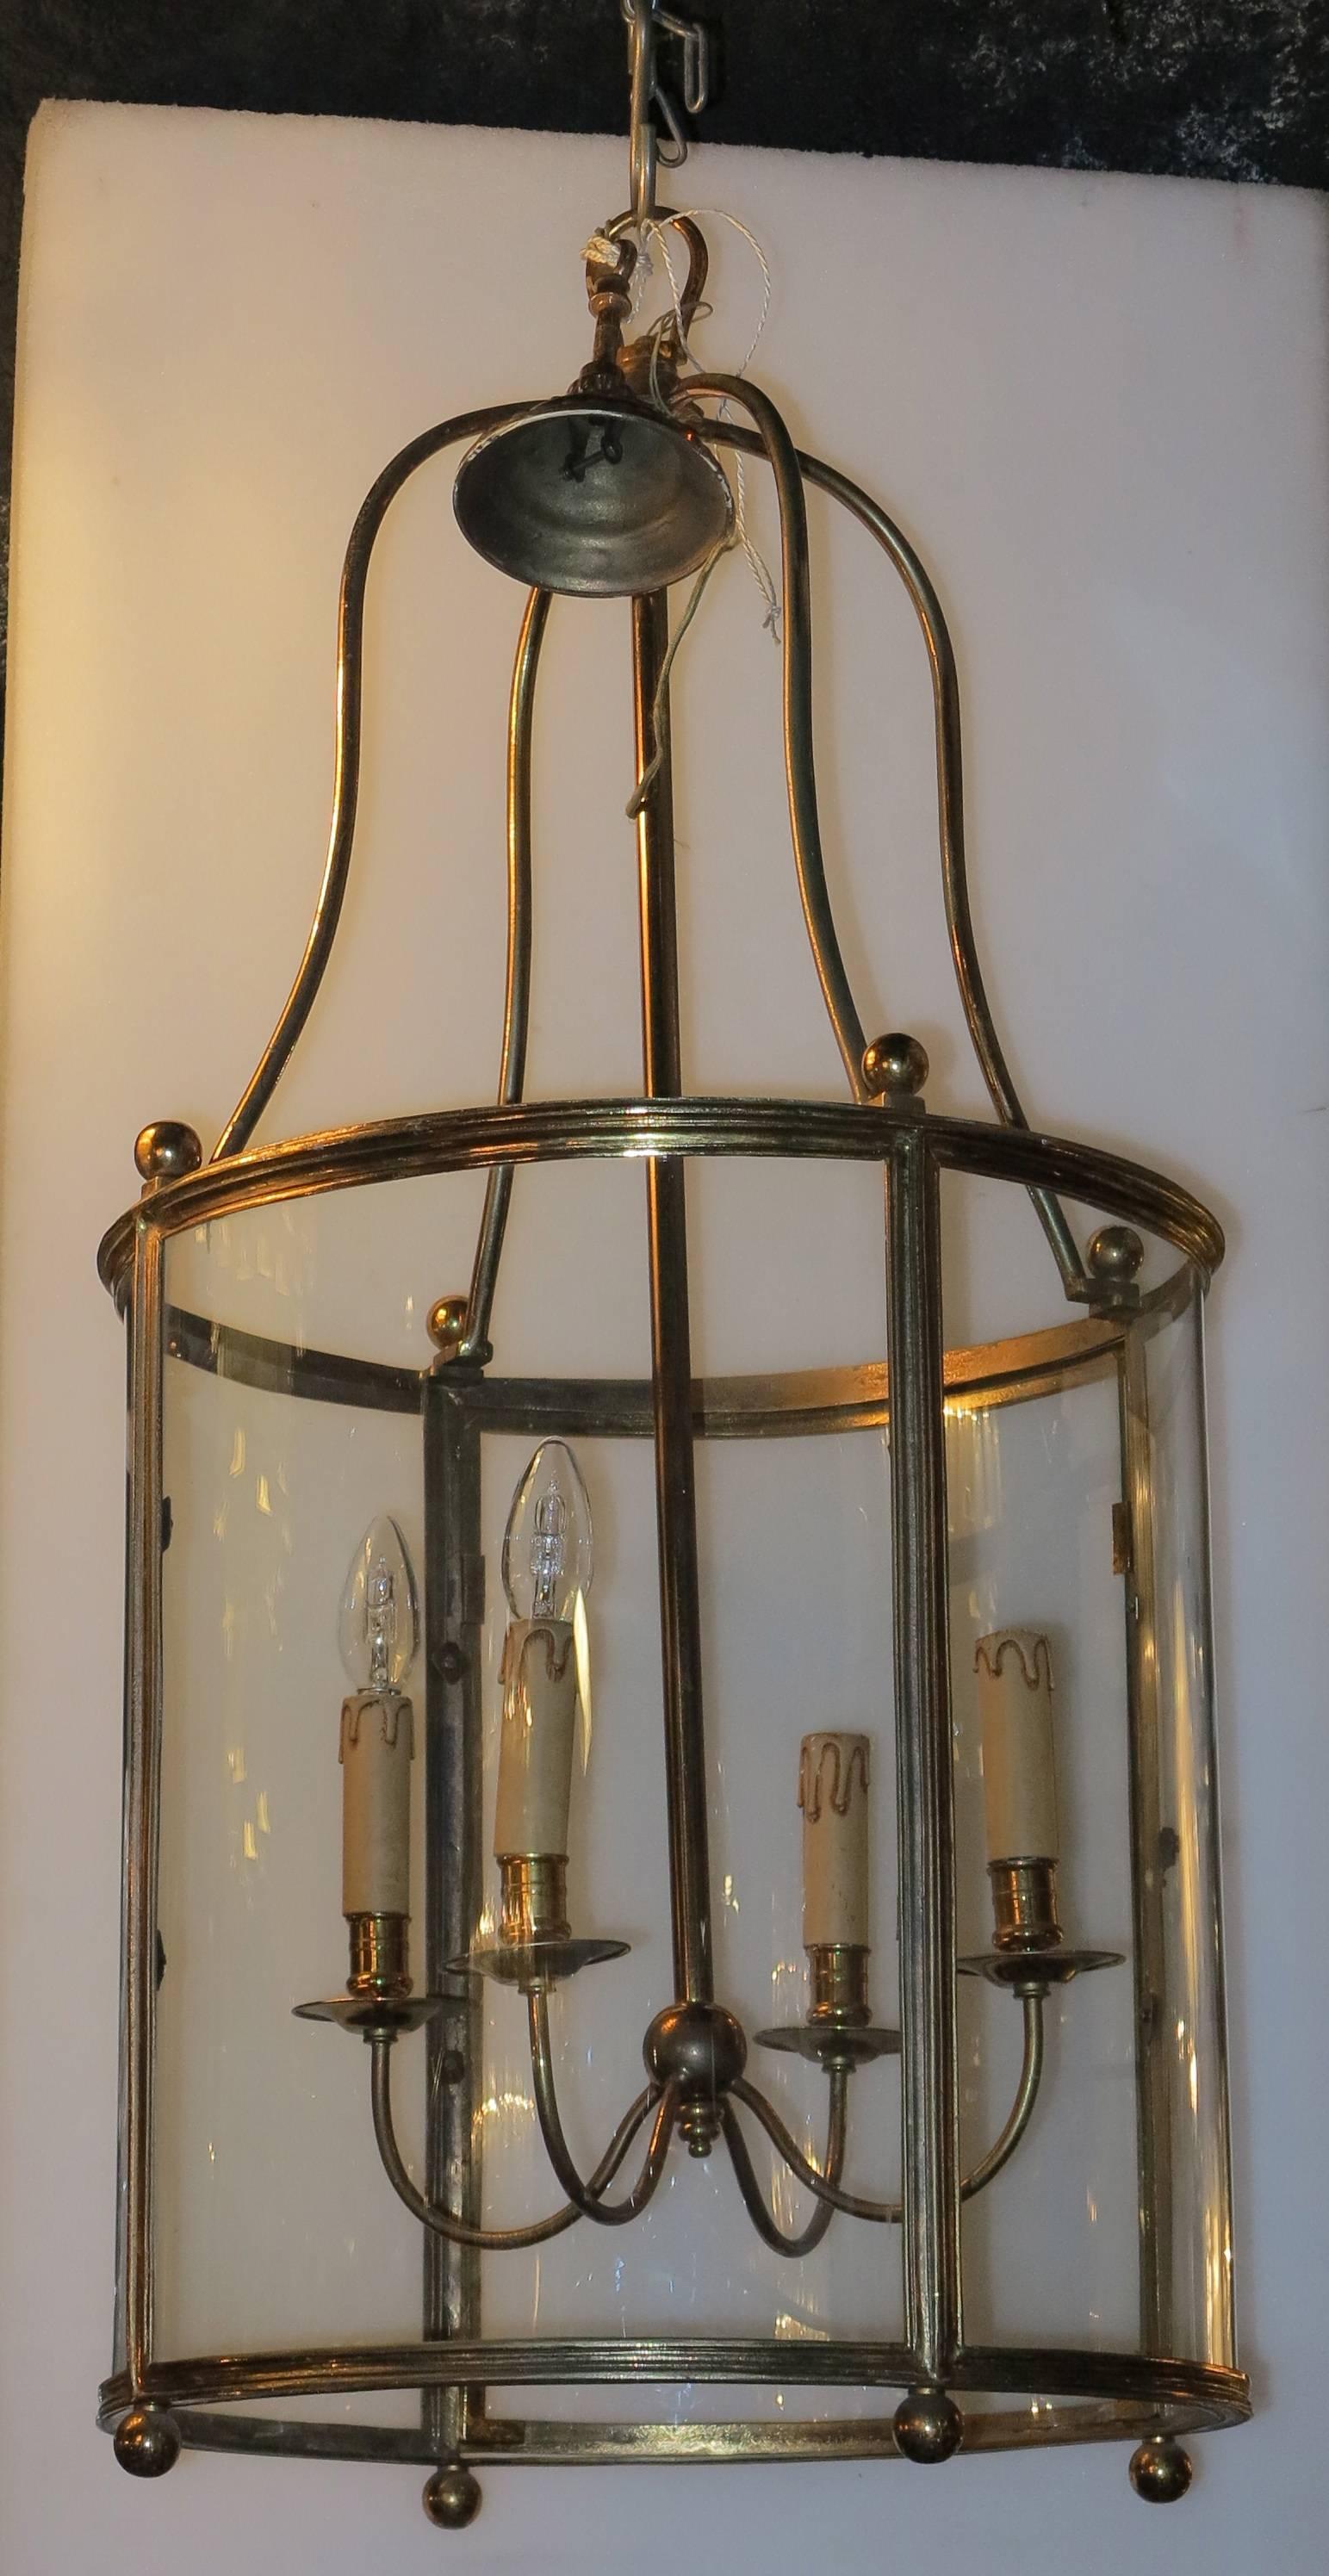 Three lanterns, height without the chain 91 cm, four lamps, circa on 1950-1970, good condition, four rounded glasses, height of the cylinder 48 cm, everything is screw.